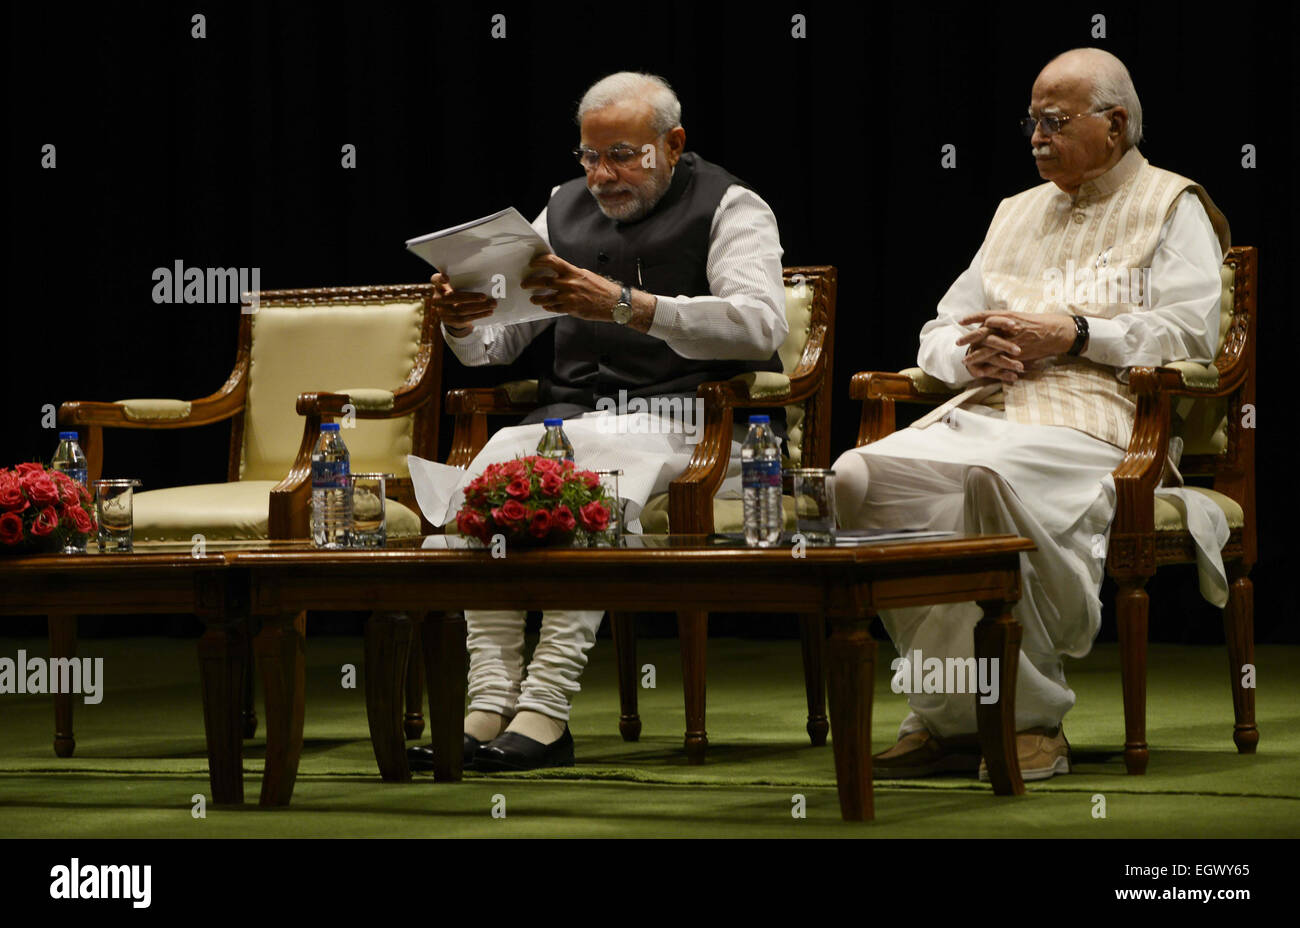 New Delhi. 3rd Mar, 2015. Indian Prime Minister Narendra Modi (L) and veteran Bhartiya Janta Party (BJP) leader L.K. Advani attend a meeting of the BJP parliamentary party at the Parliament Library in New Delhi, India, March 2, 2015. © Xinhua/Alamy Live News Stock Photo